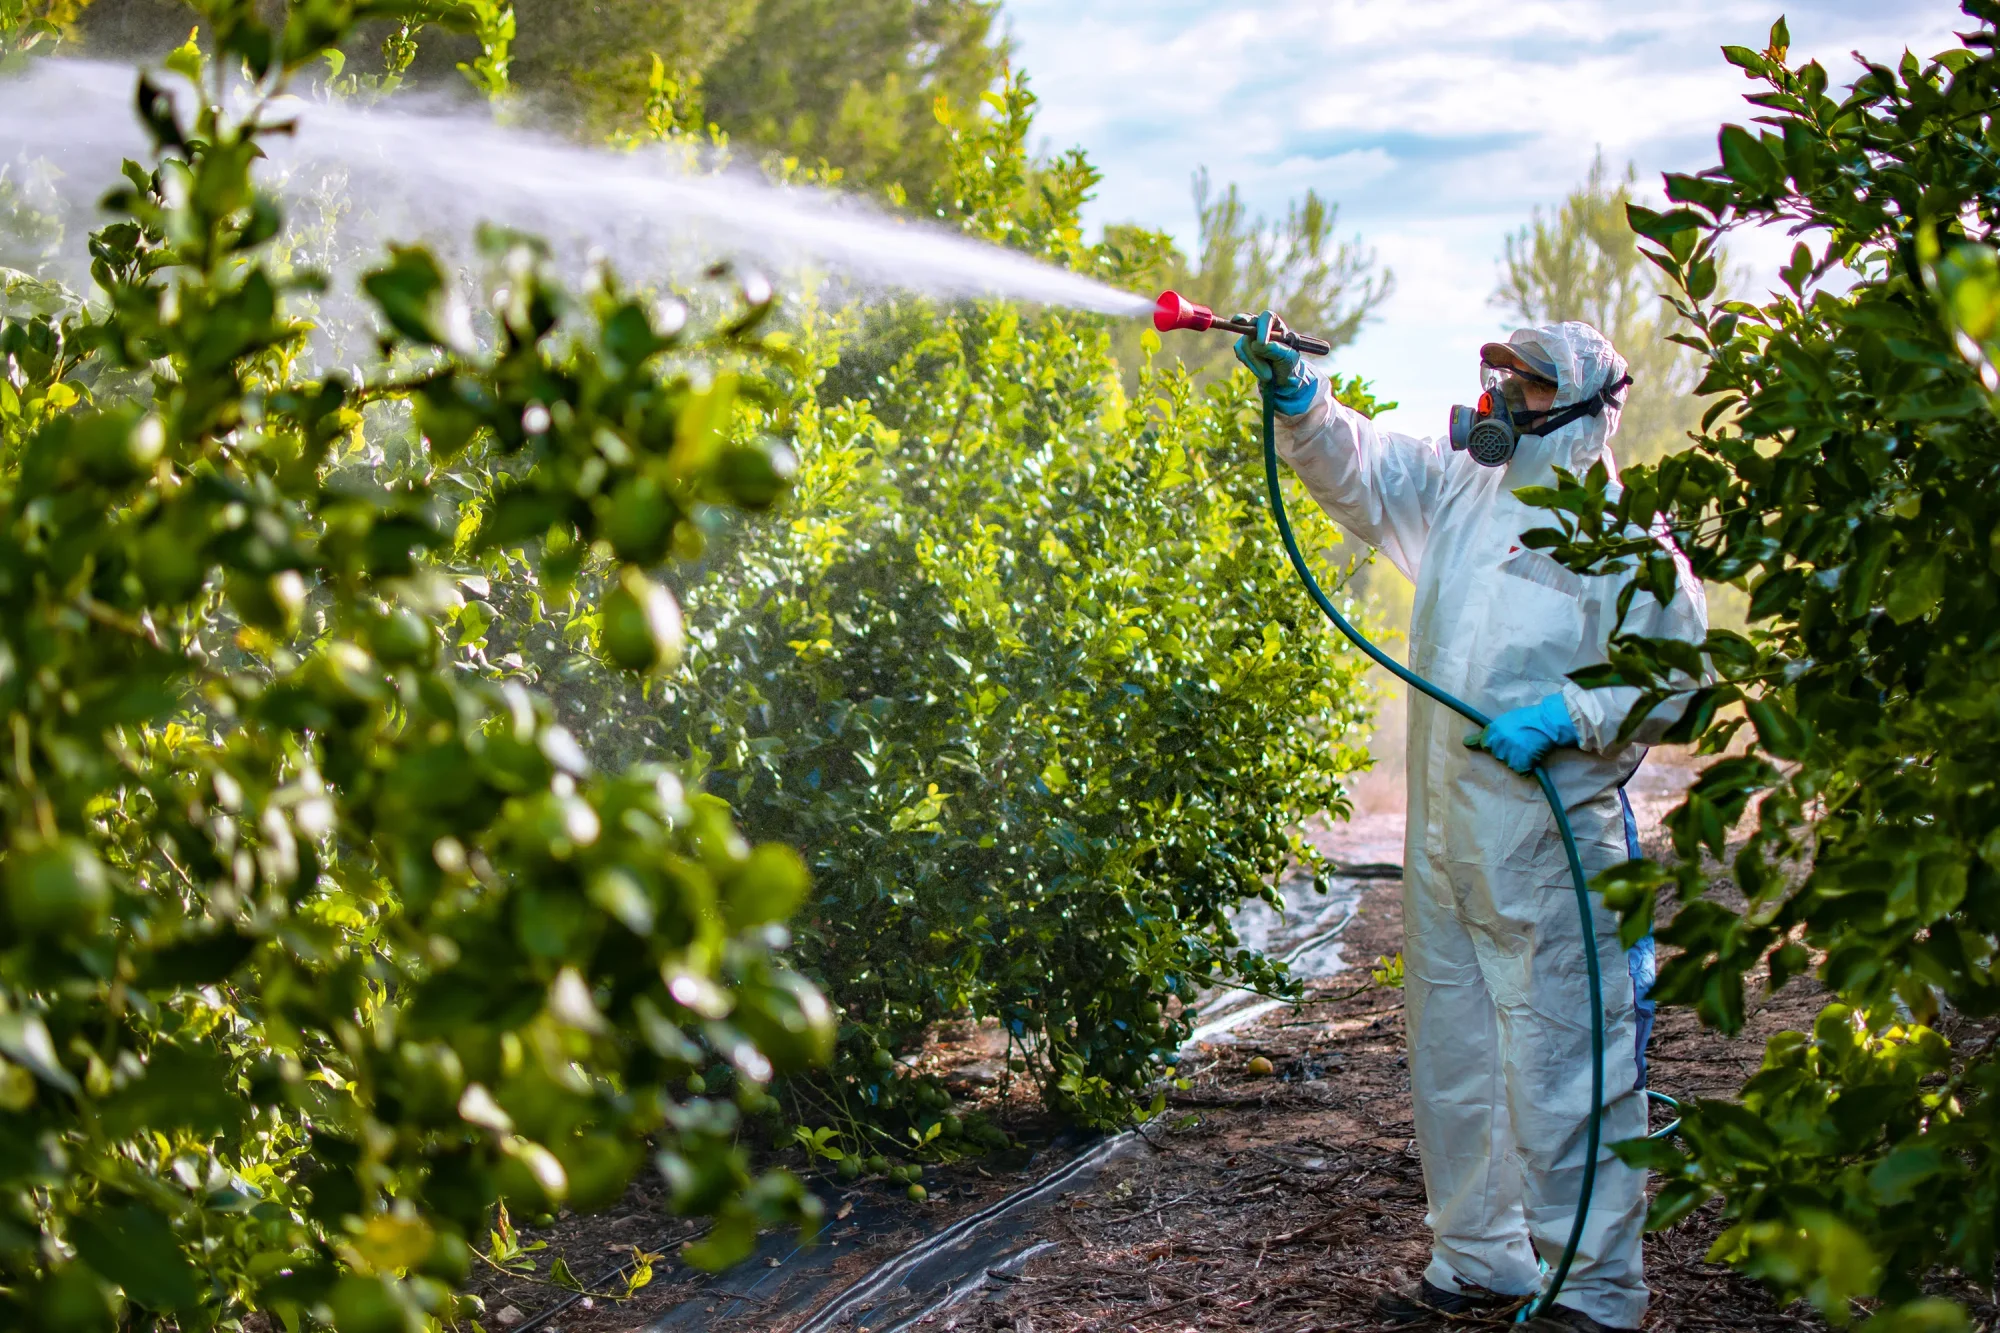 Person Spraying Pesticides on Produce